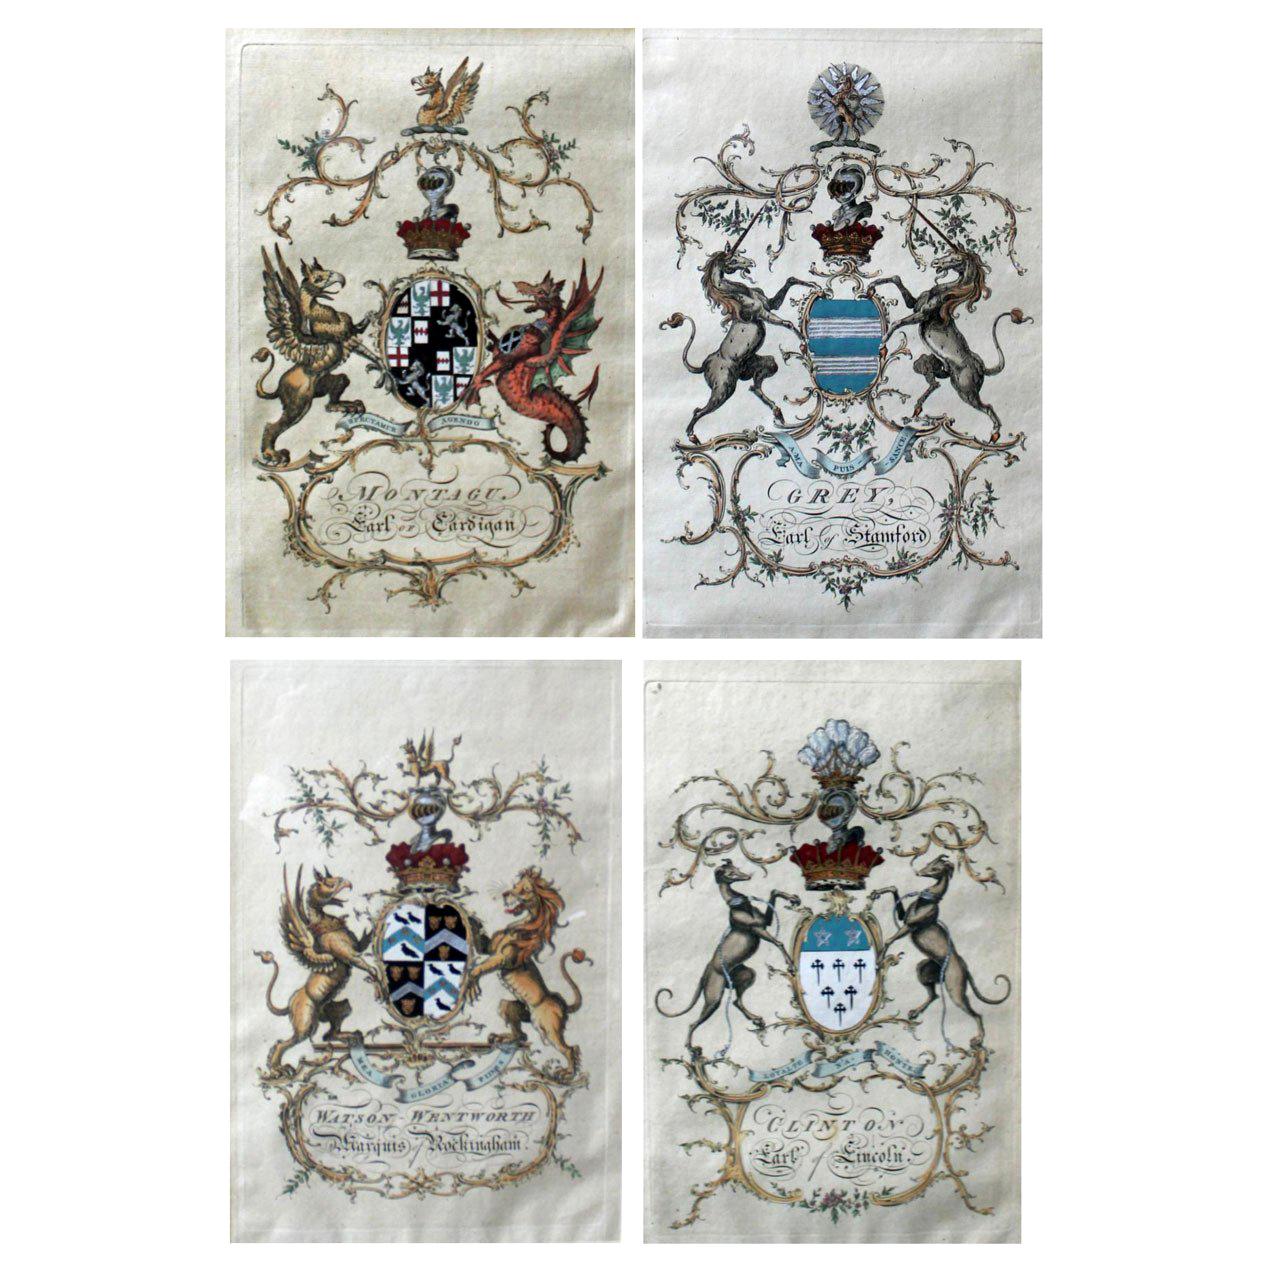 Highy detailed, hand painted Old English series "Cote of Arms"